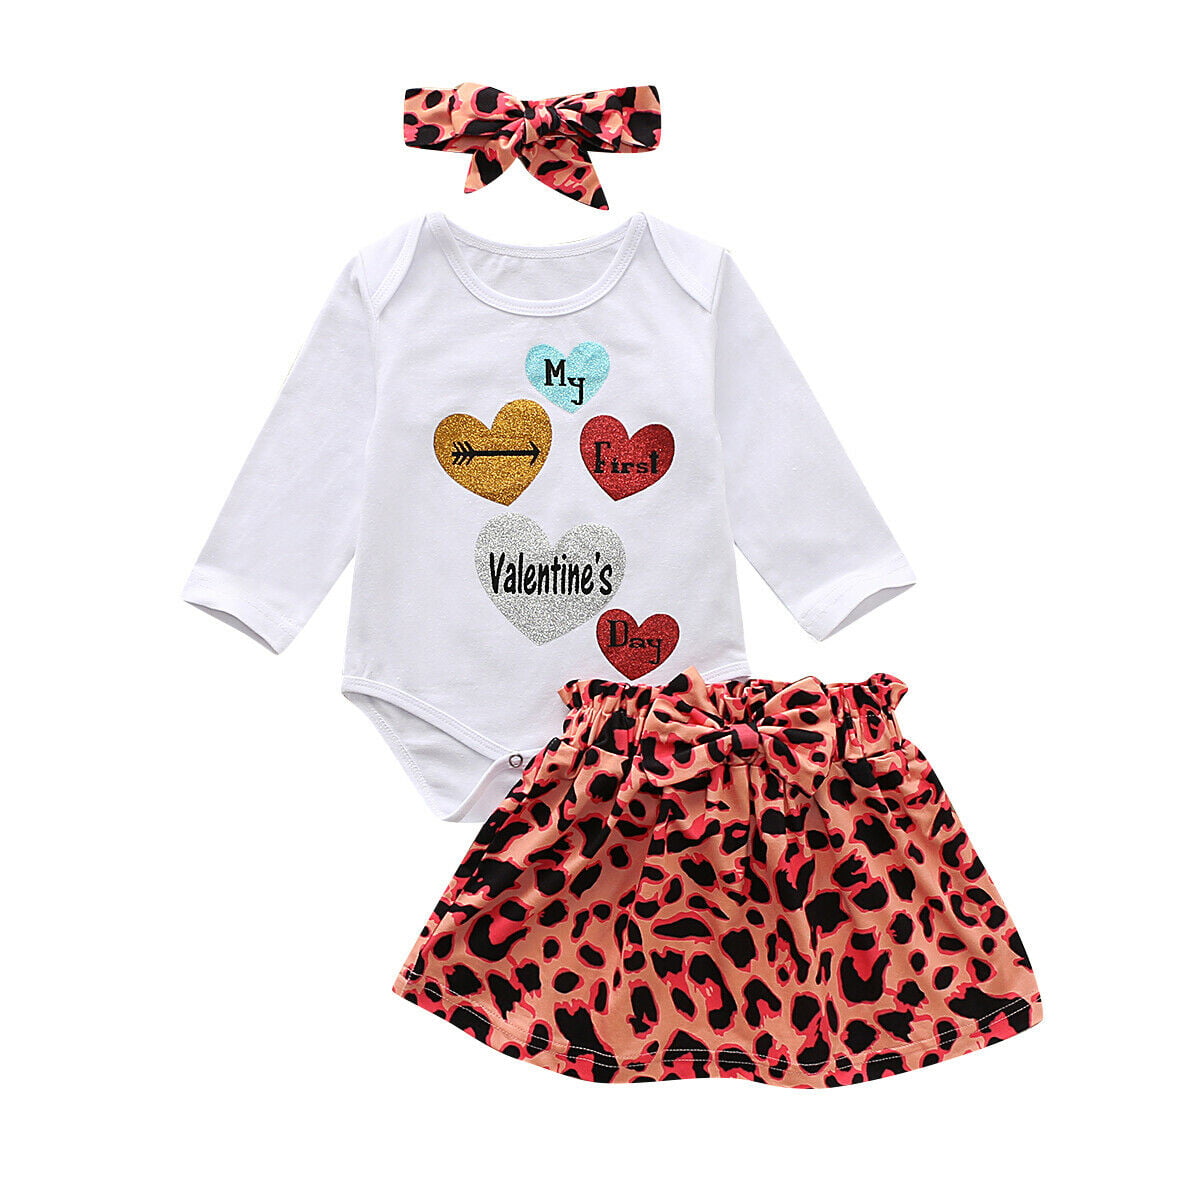 Details about   2pc Kids Baby Girls Summer Dress White Flare sleeve Blouse Tops+Floral Skirt Set 